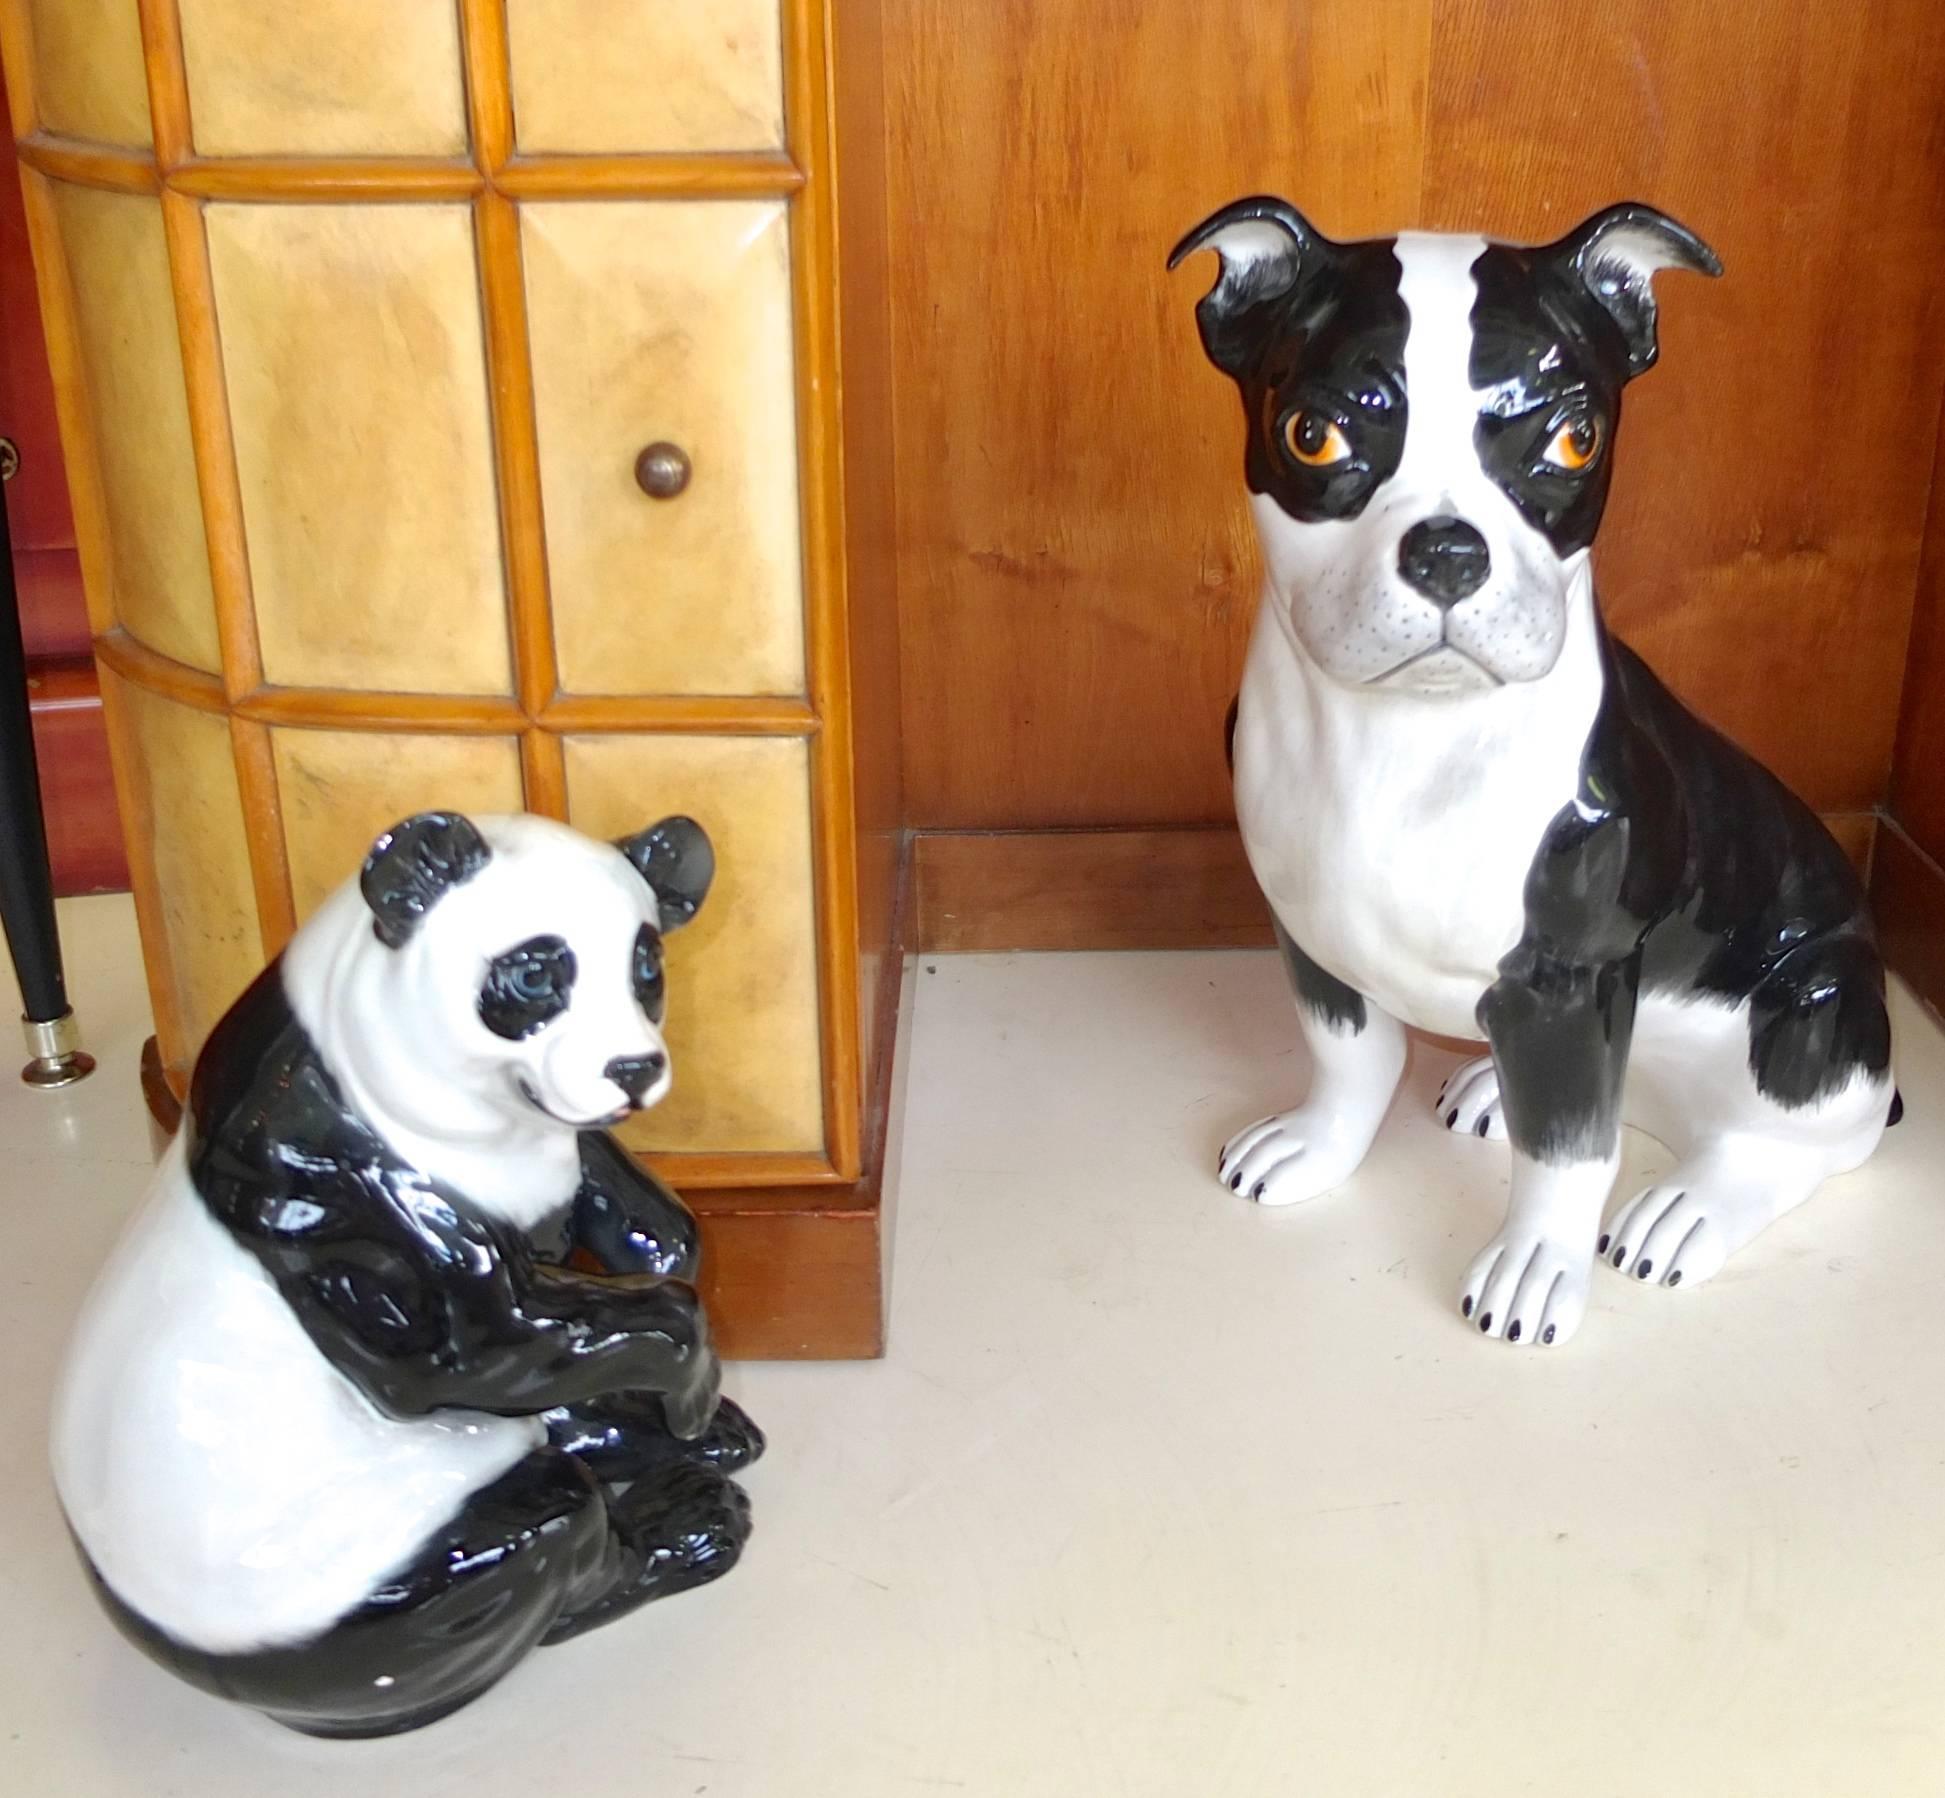 Delightful large-scale ceramic figures of a nearly life-size black and white glazed Boston Terrier and a Panda bear. Marked with numbers and Made in Italy. Attributed to Eugenio Pattarino and/or his student Paolo Marioni.

Measures: Terrier is 16